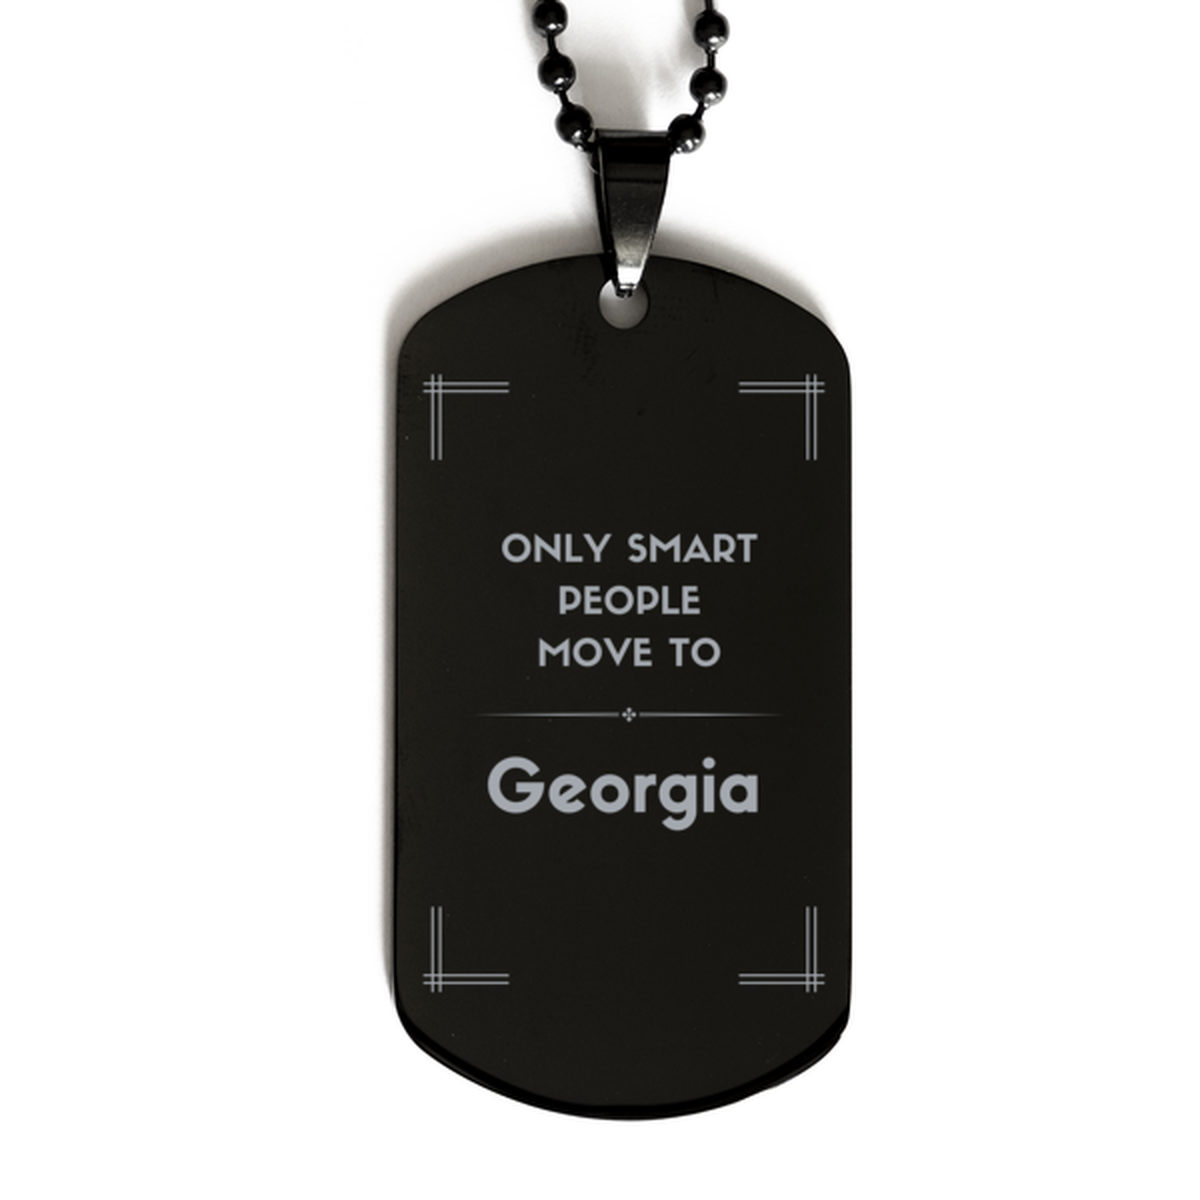 Only smart people move to Georgia Black Dog Tag, Gag Gifts For Georgia, Move to Georgia Gifts for Friends Coworker Funny Saying Quote